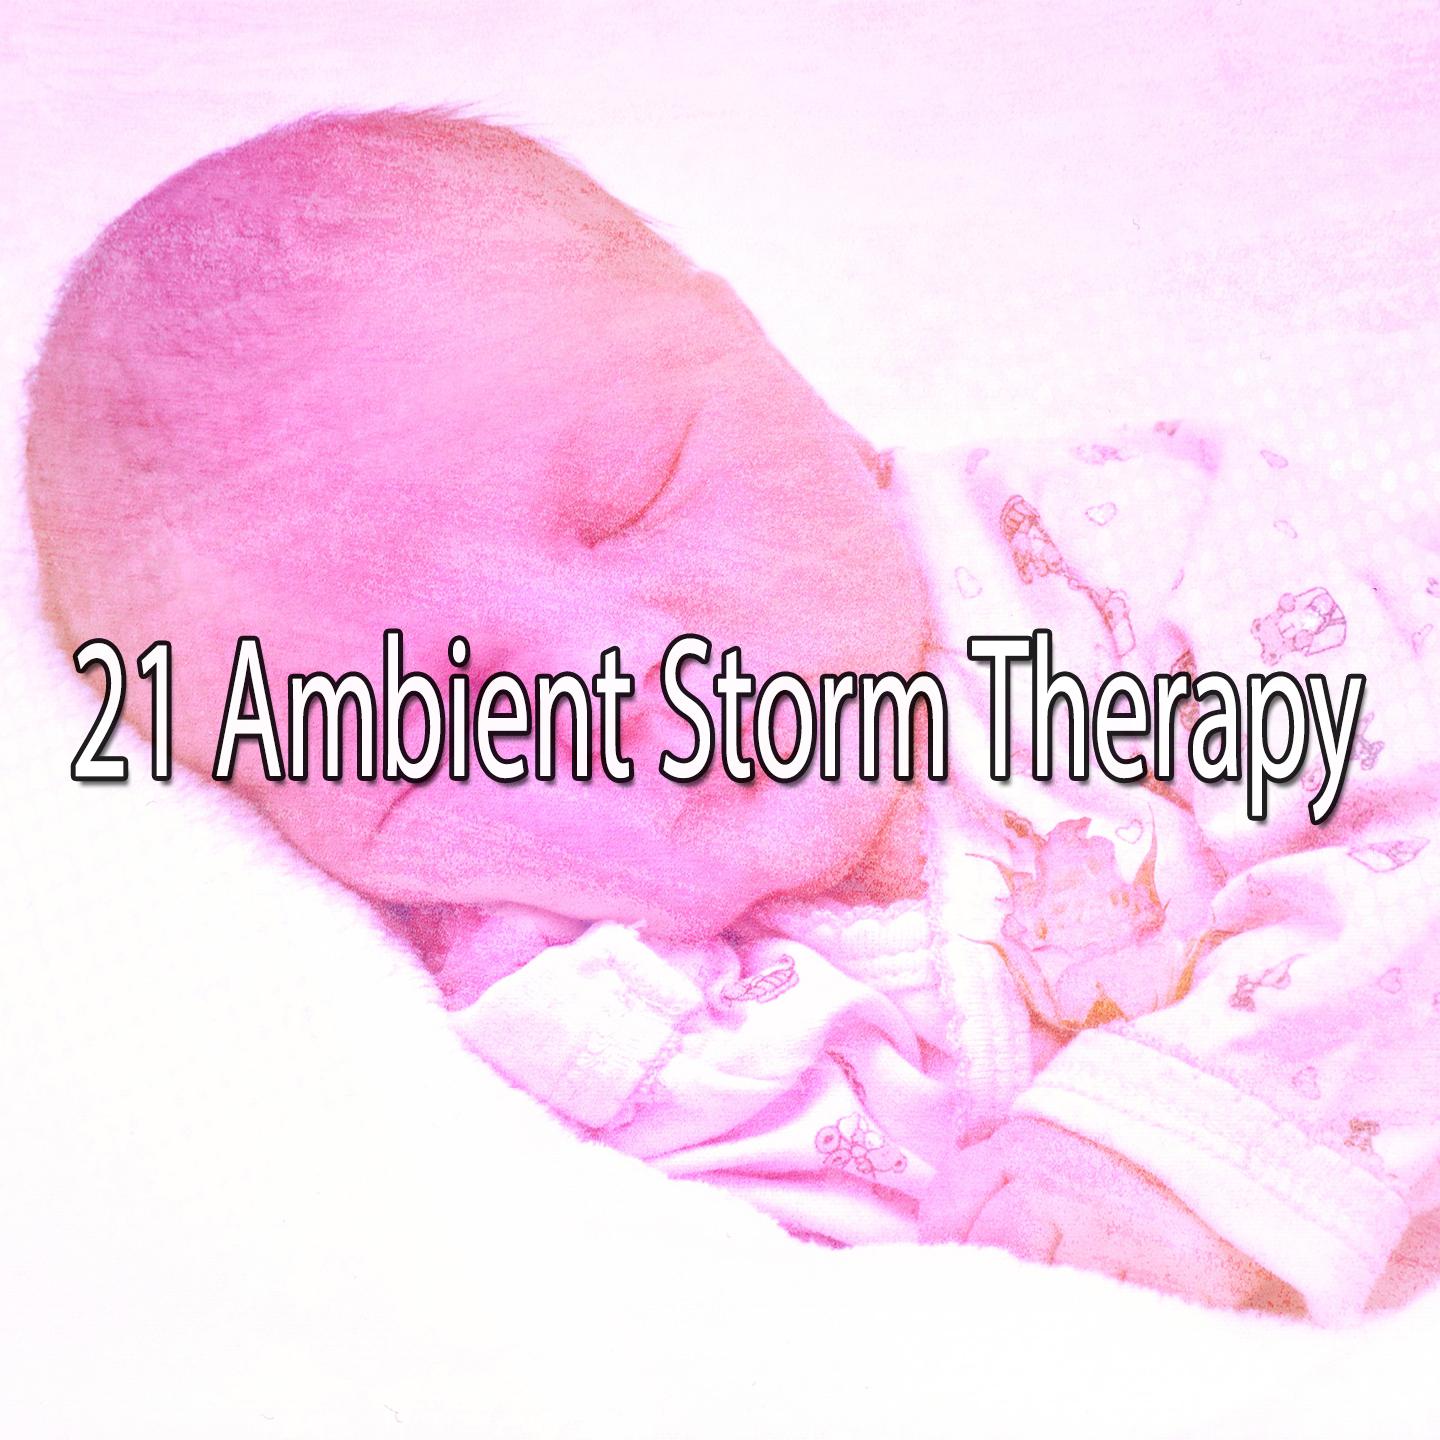 21 Ambient Storm Therapy